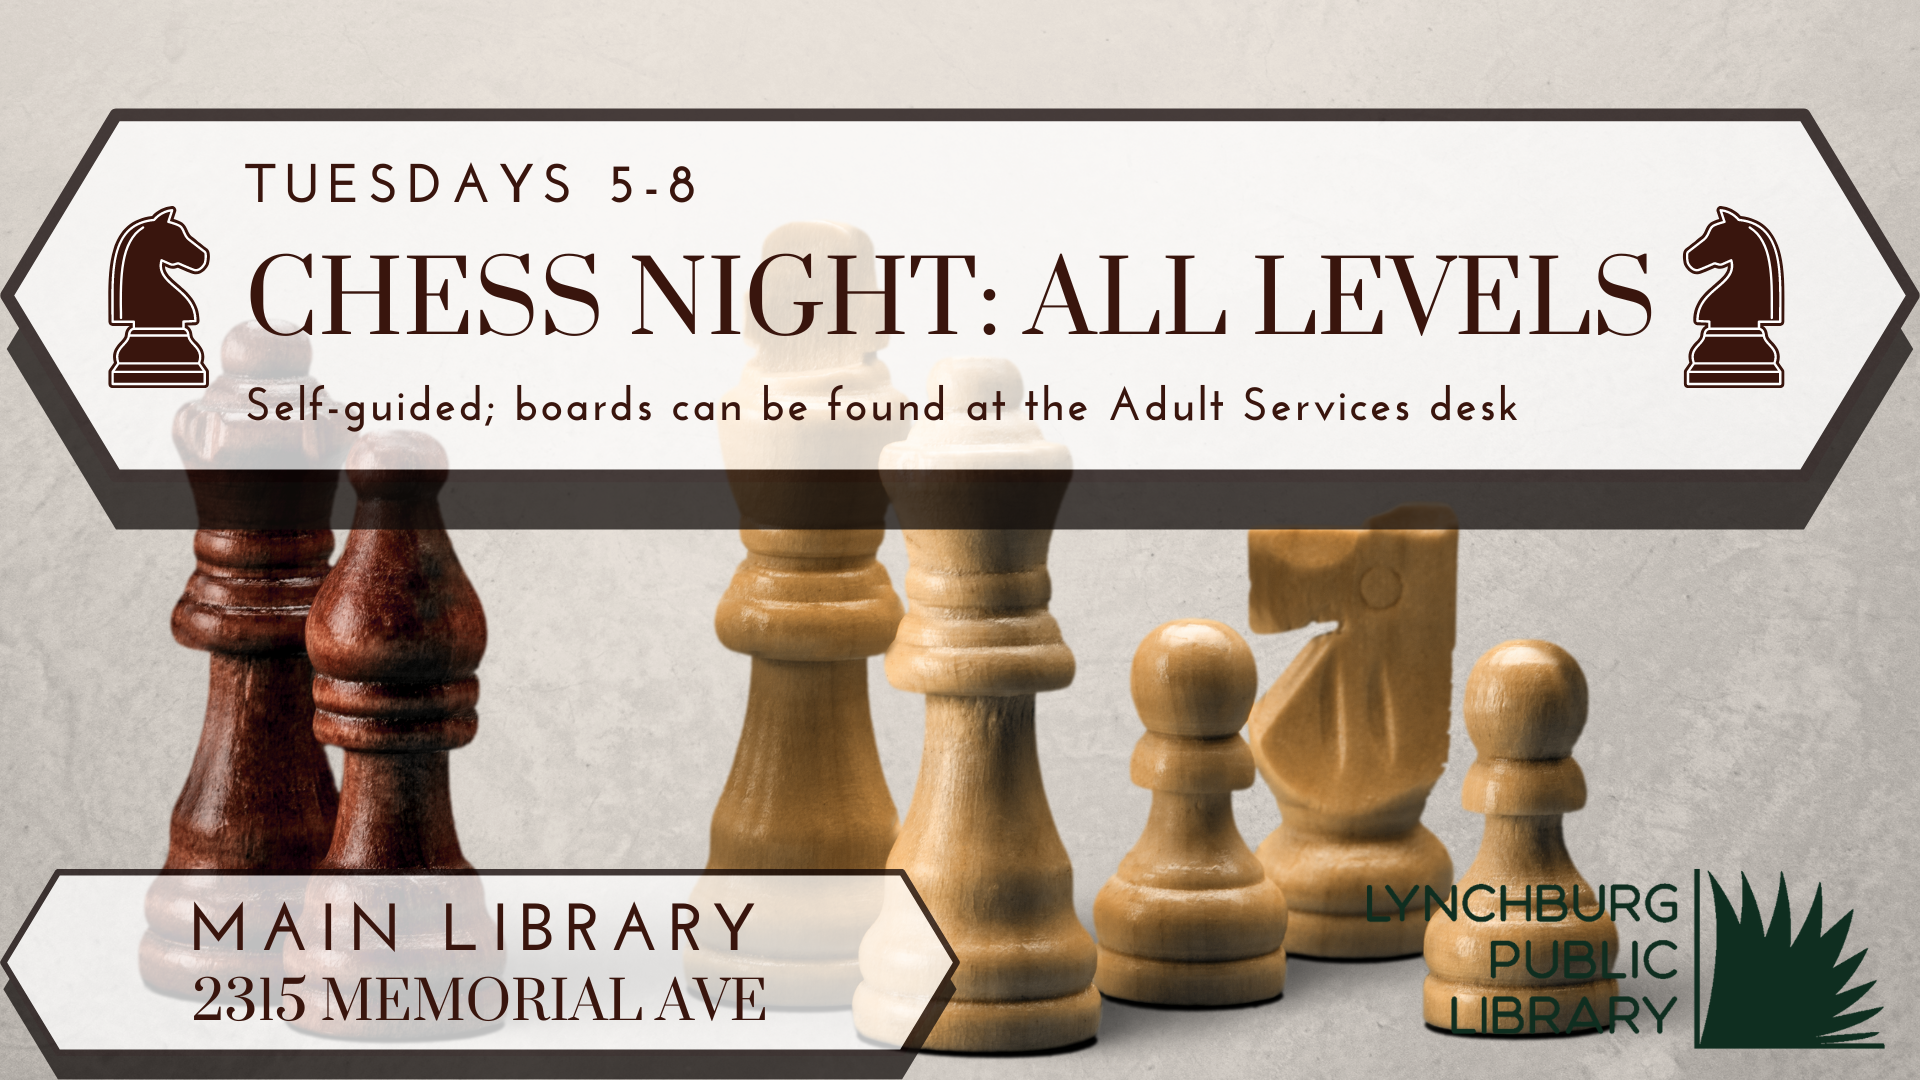 chess night: all levels; tuesdays, 5-8 pm; self-guided, boards can be found at the Adult Services Desk; main library; 2315 memorial ave